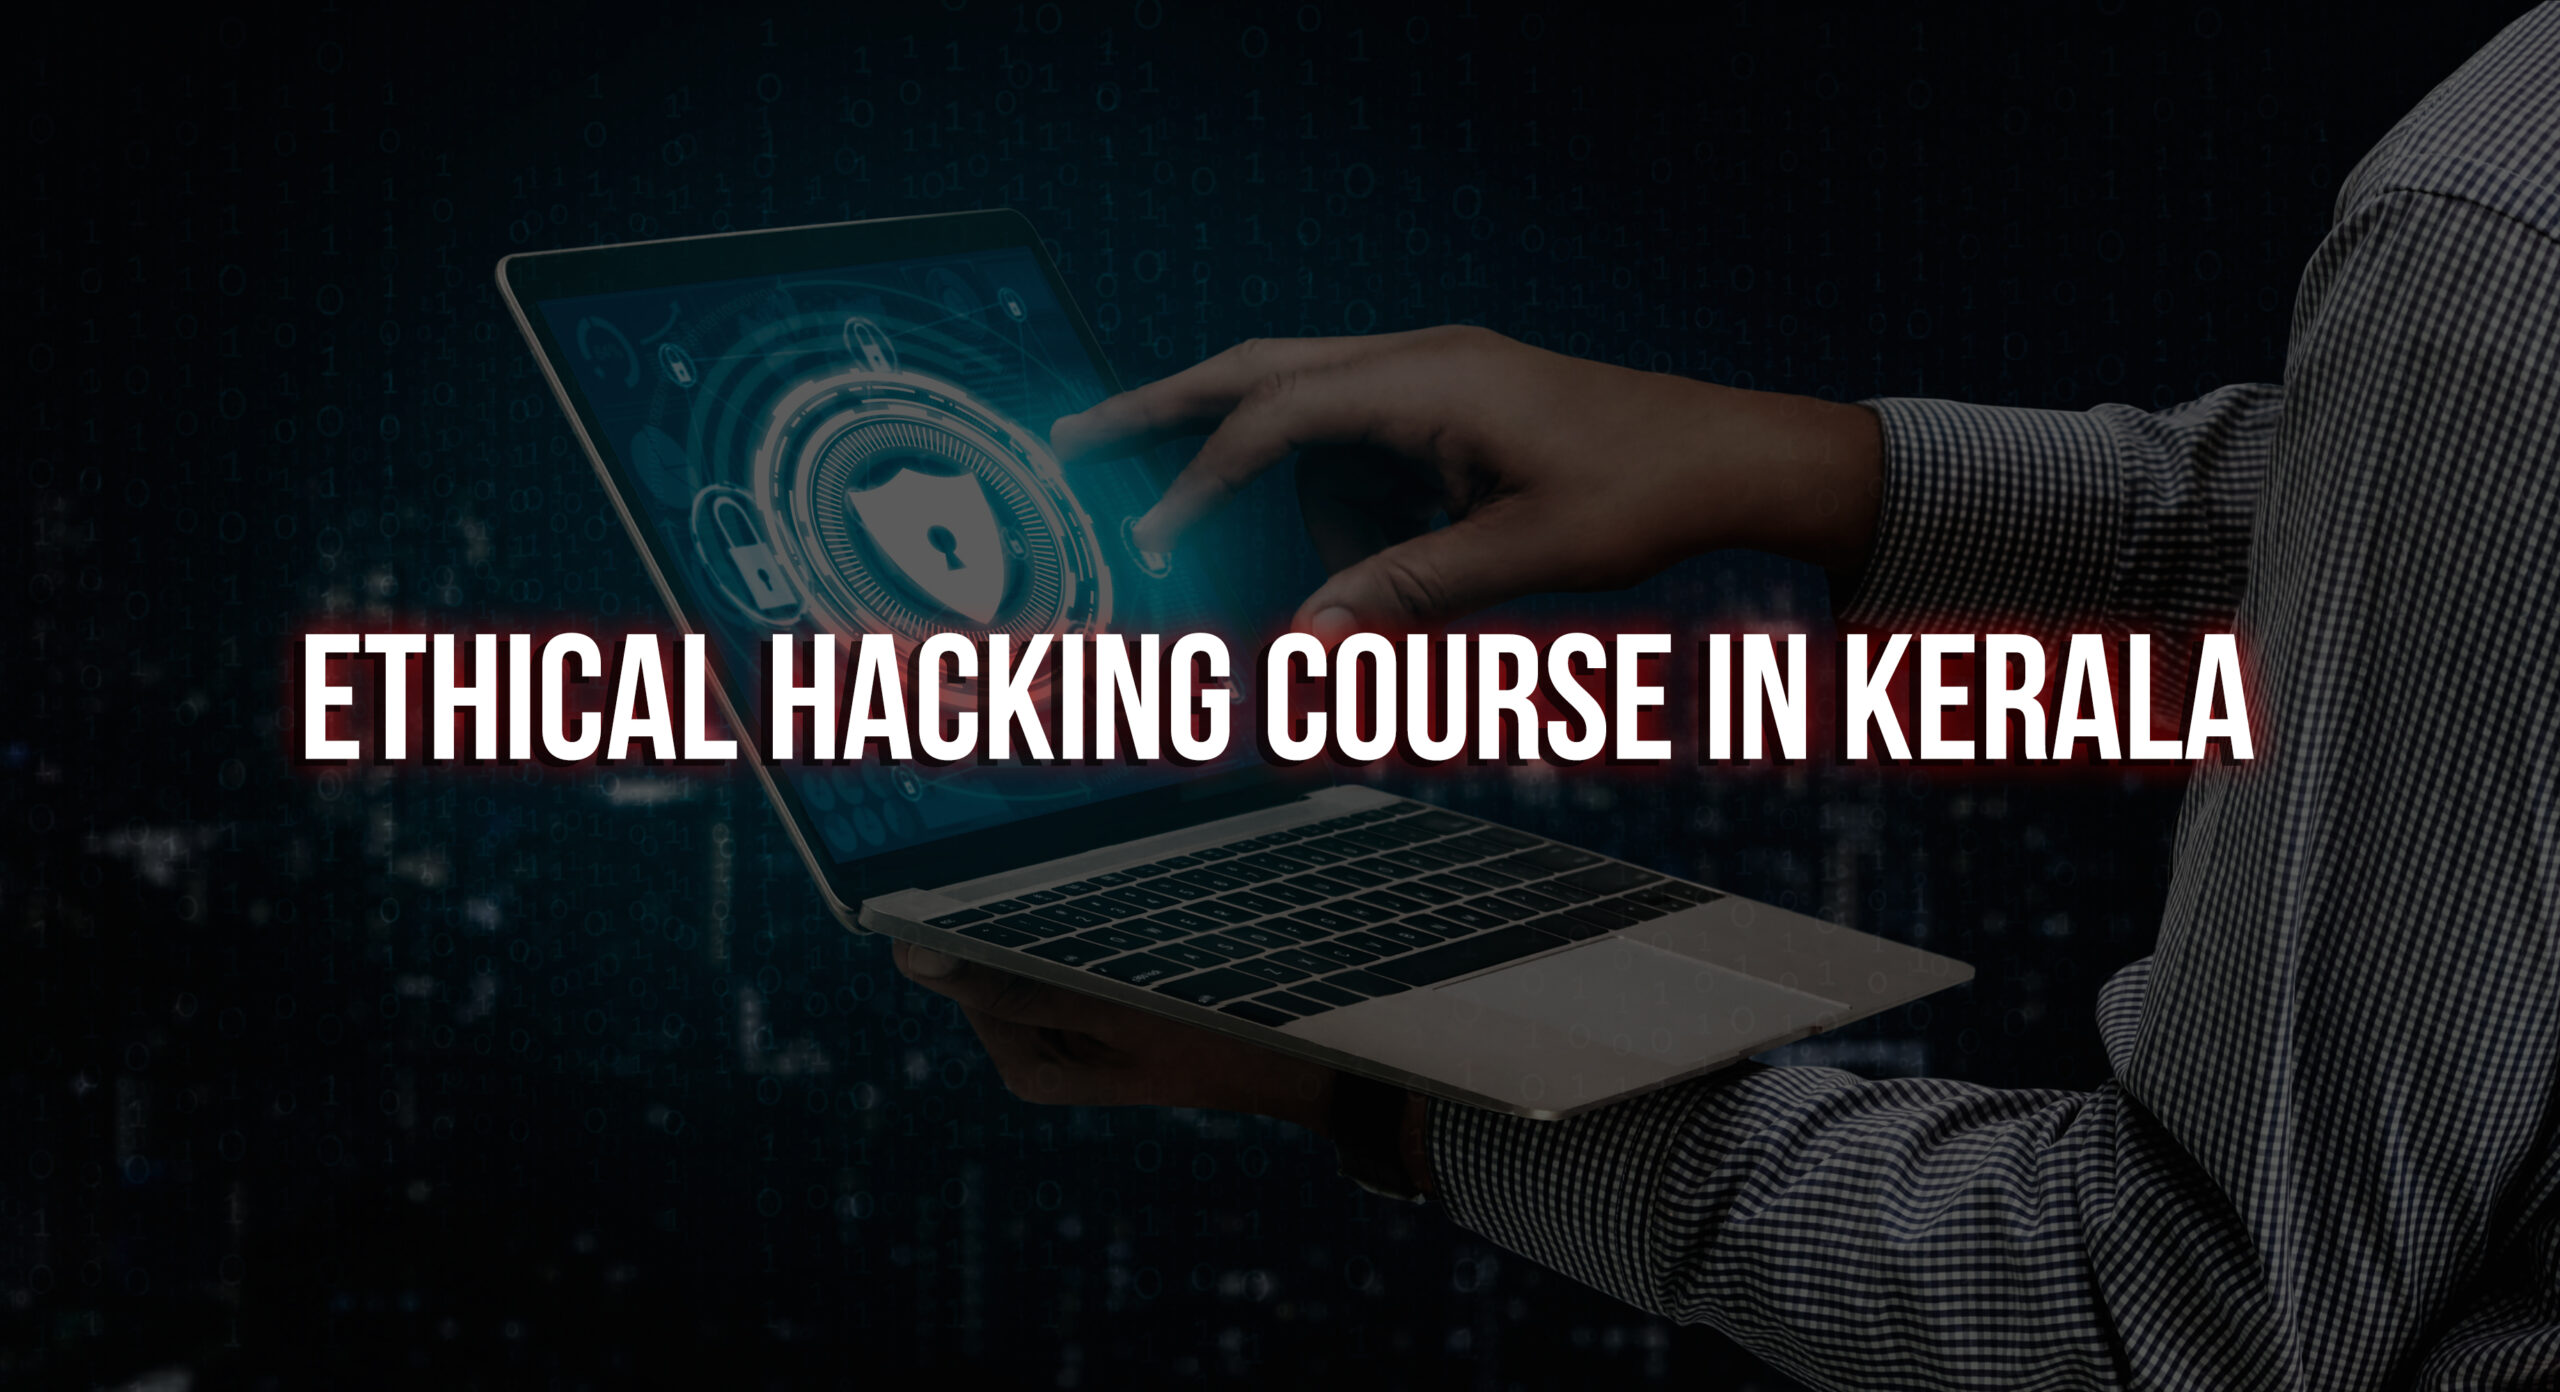 Ethical Hacking course in kerala